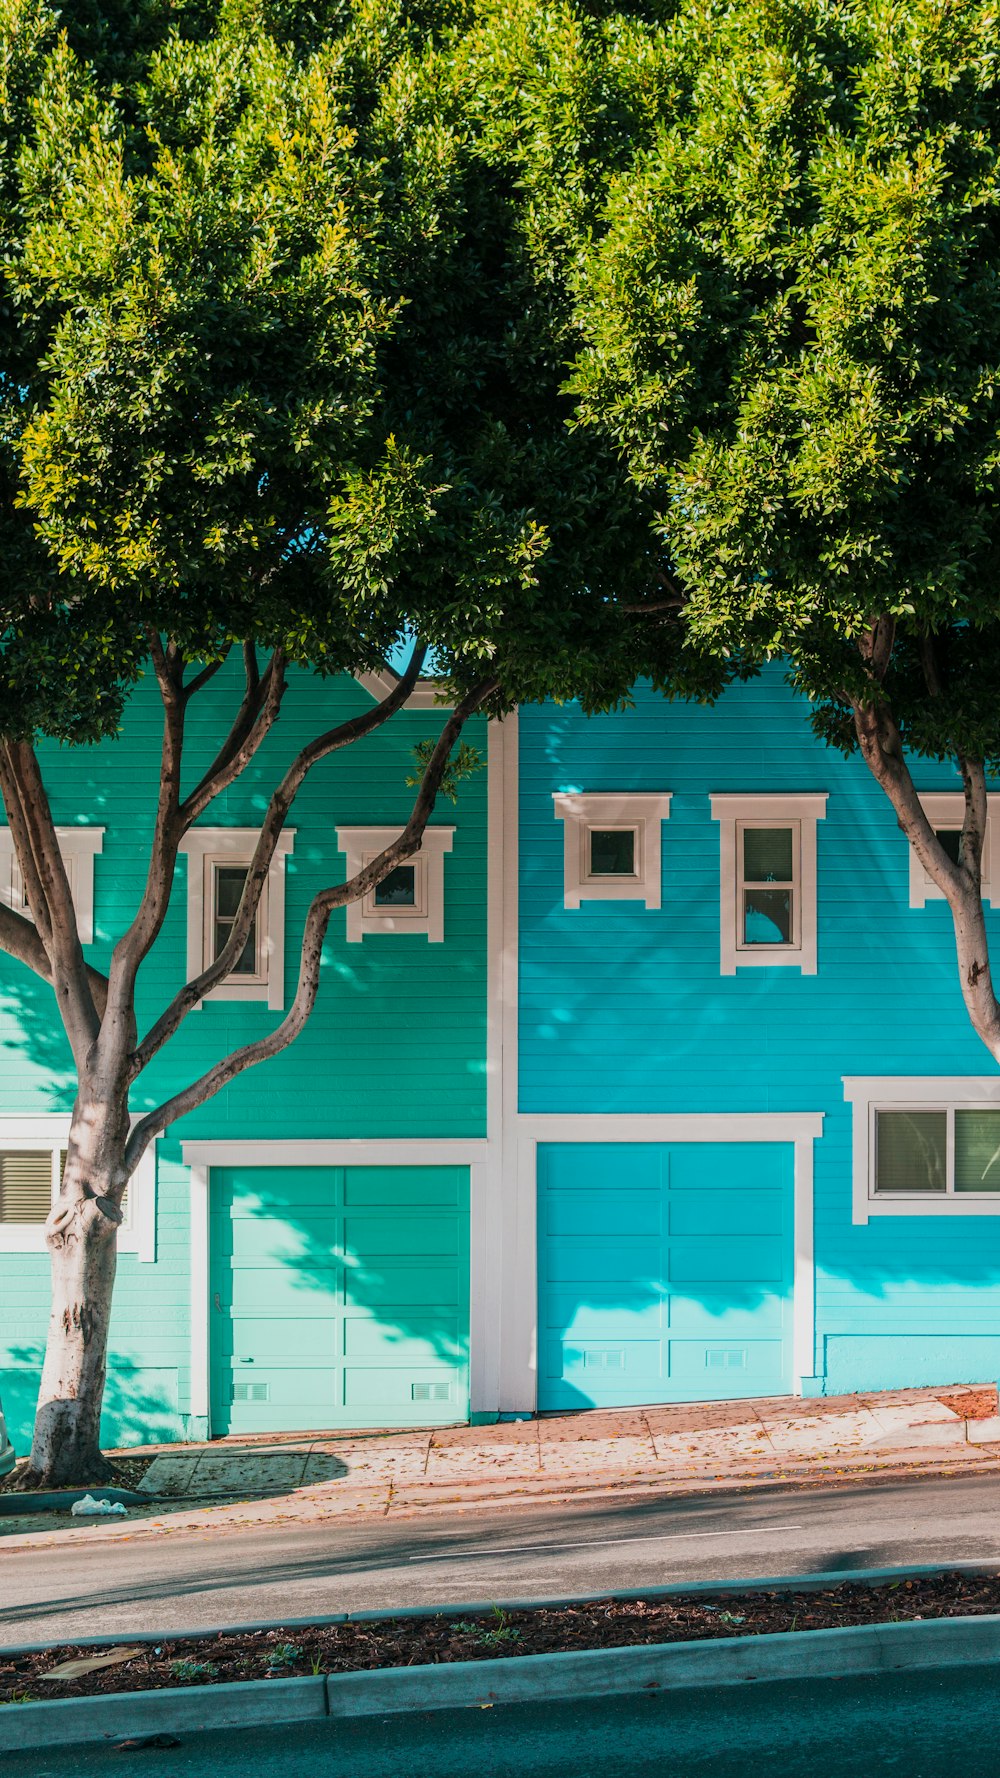 green and blue houses beside trees on sidewalk